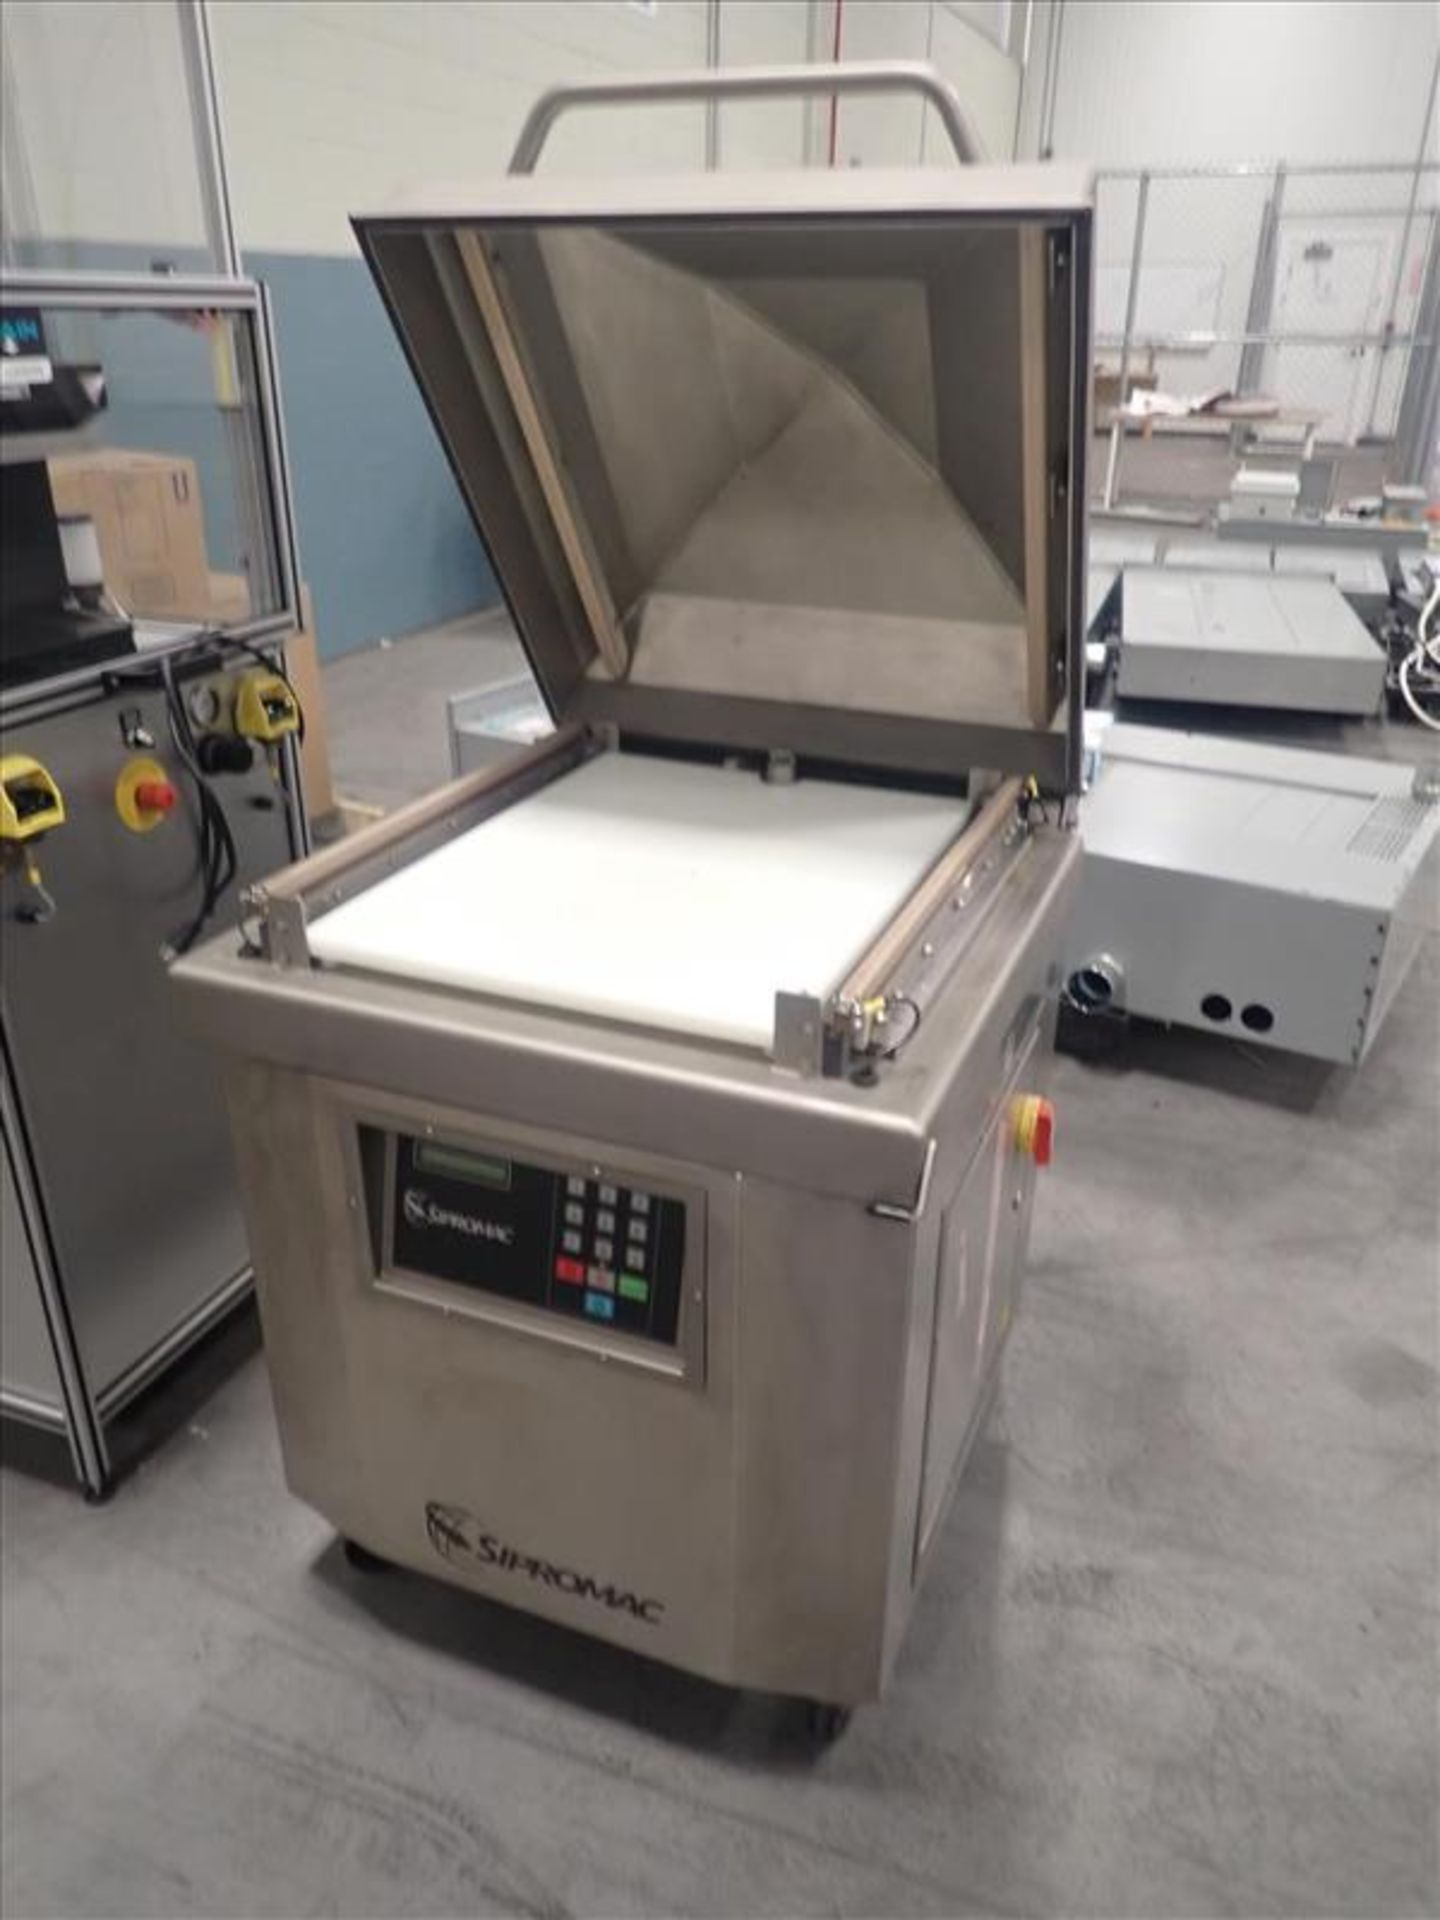 Sipromac Vacuum Sealer, model Siprovac 550A, S/N 14264 (2018), single-chamber, approx. 20 in. x 27